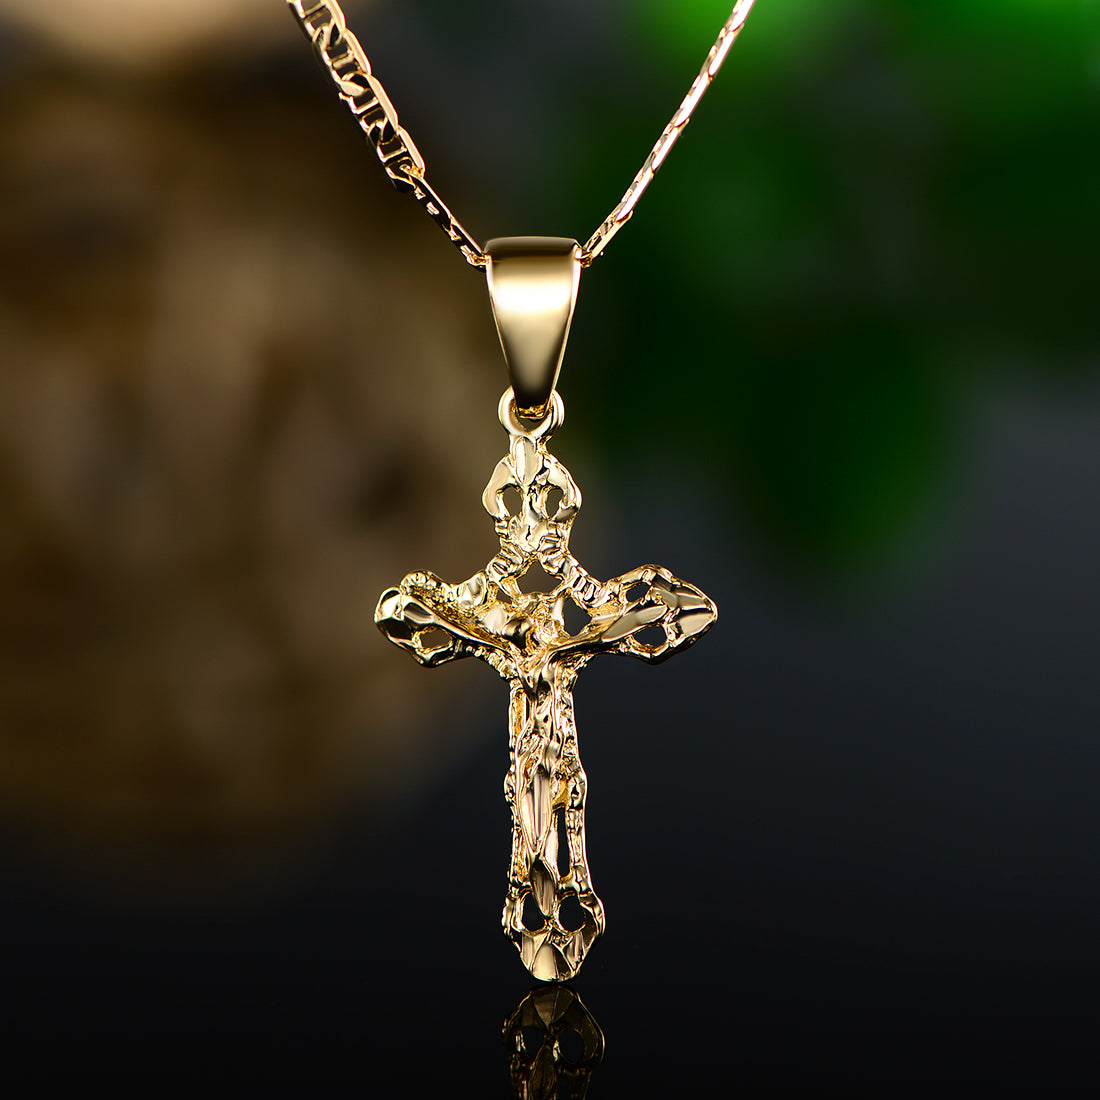 18K Gold Plated Crucified Jesus Pendant Necklace